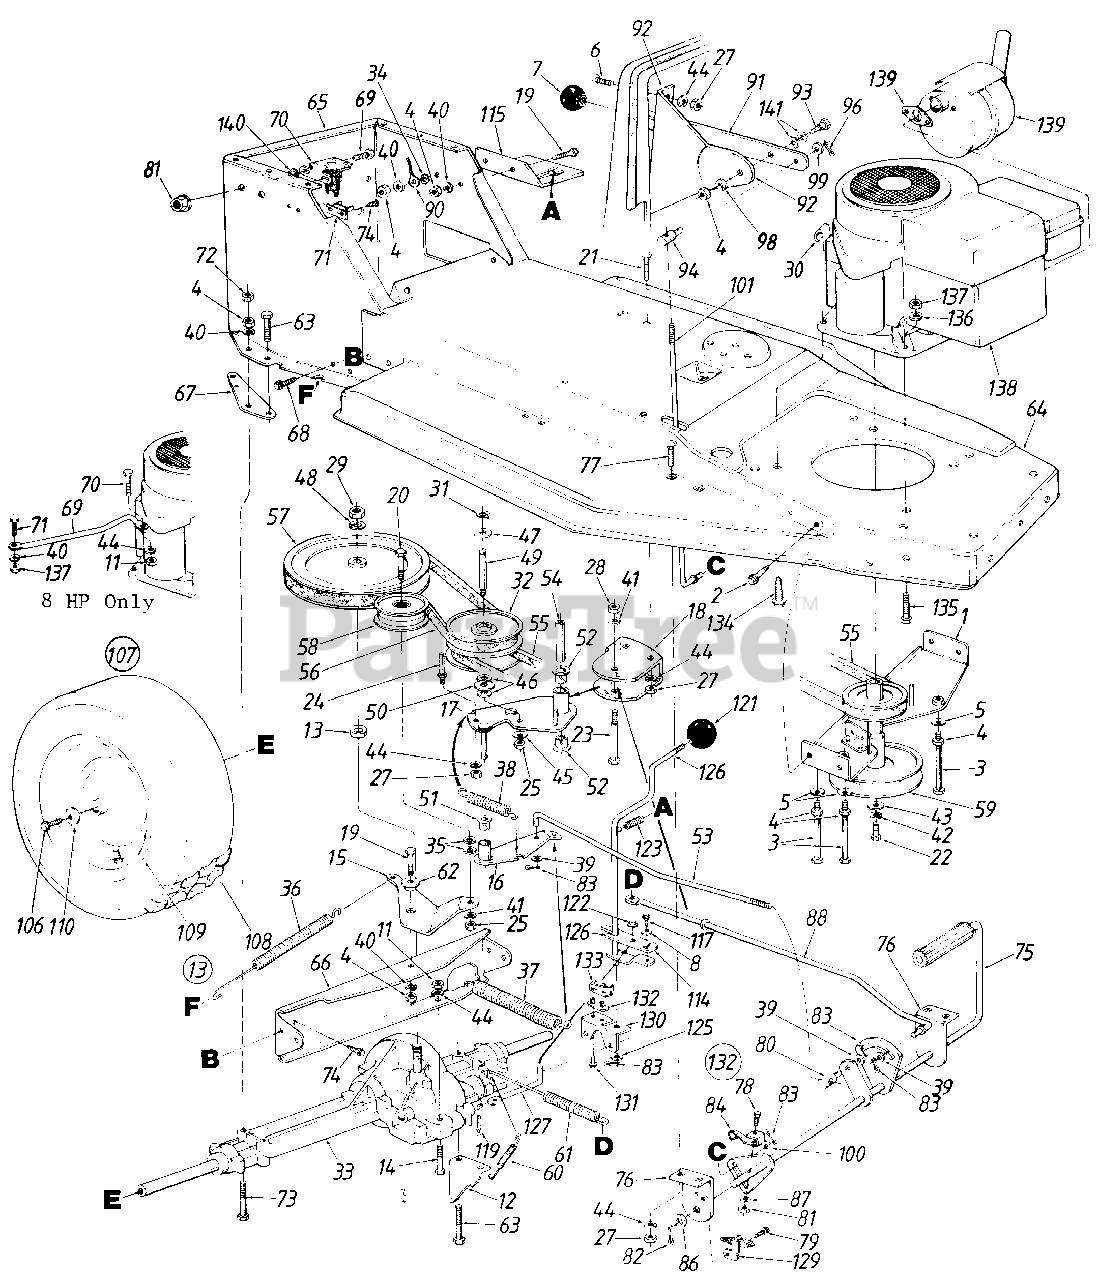 Turf Trac Parts on the Parts Diagram for 138-342-015 - Turf Trac Lawn